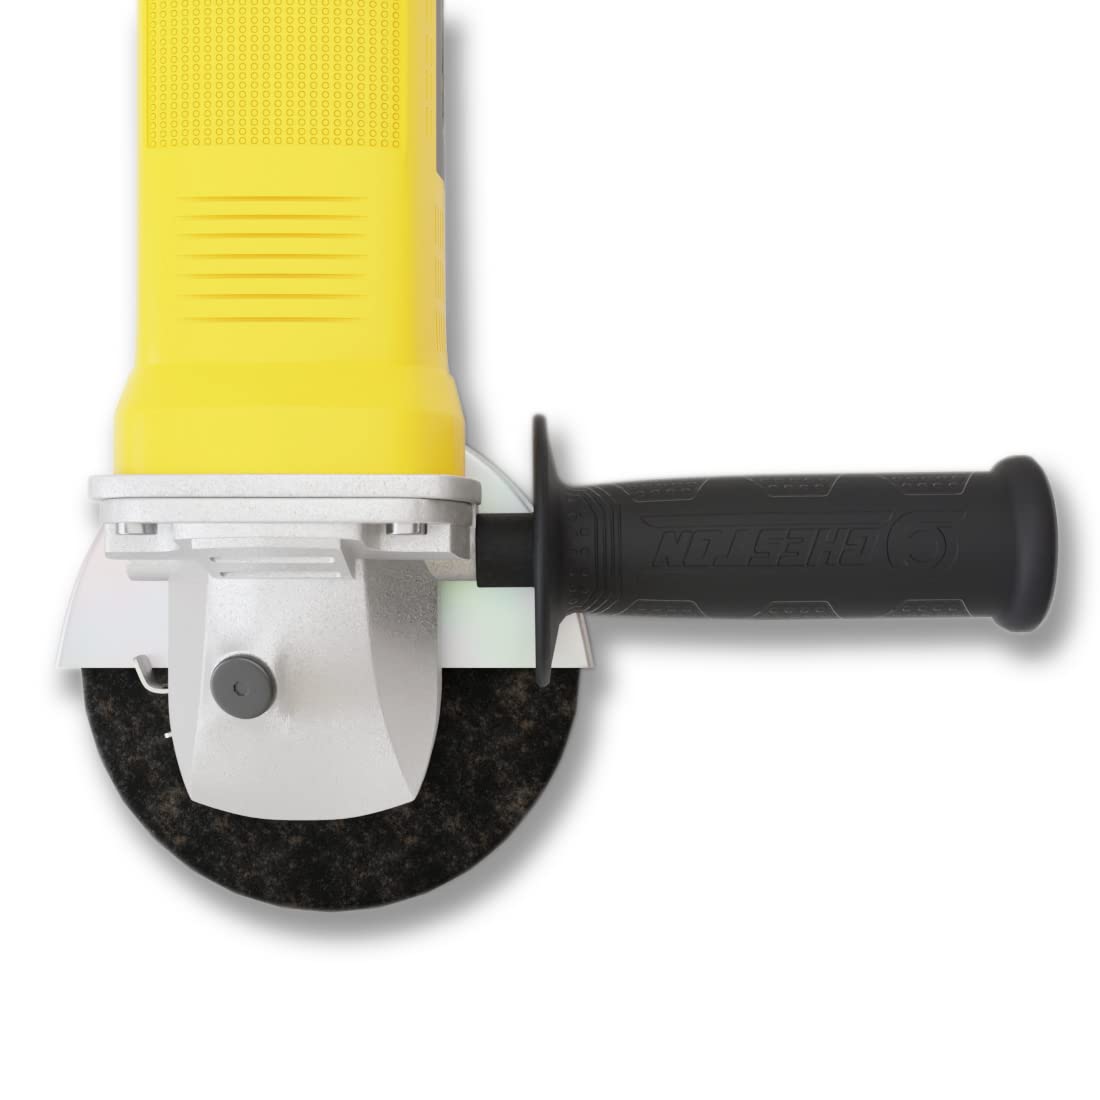 Cheston Angle Grinder for Grinding, Cutting, Polishing (4 inch/100mm), 850W Yellow Grinder Machine with Auxiliary Handle